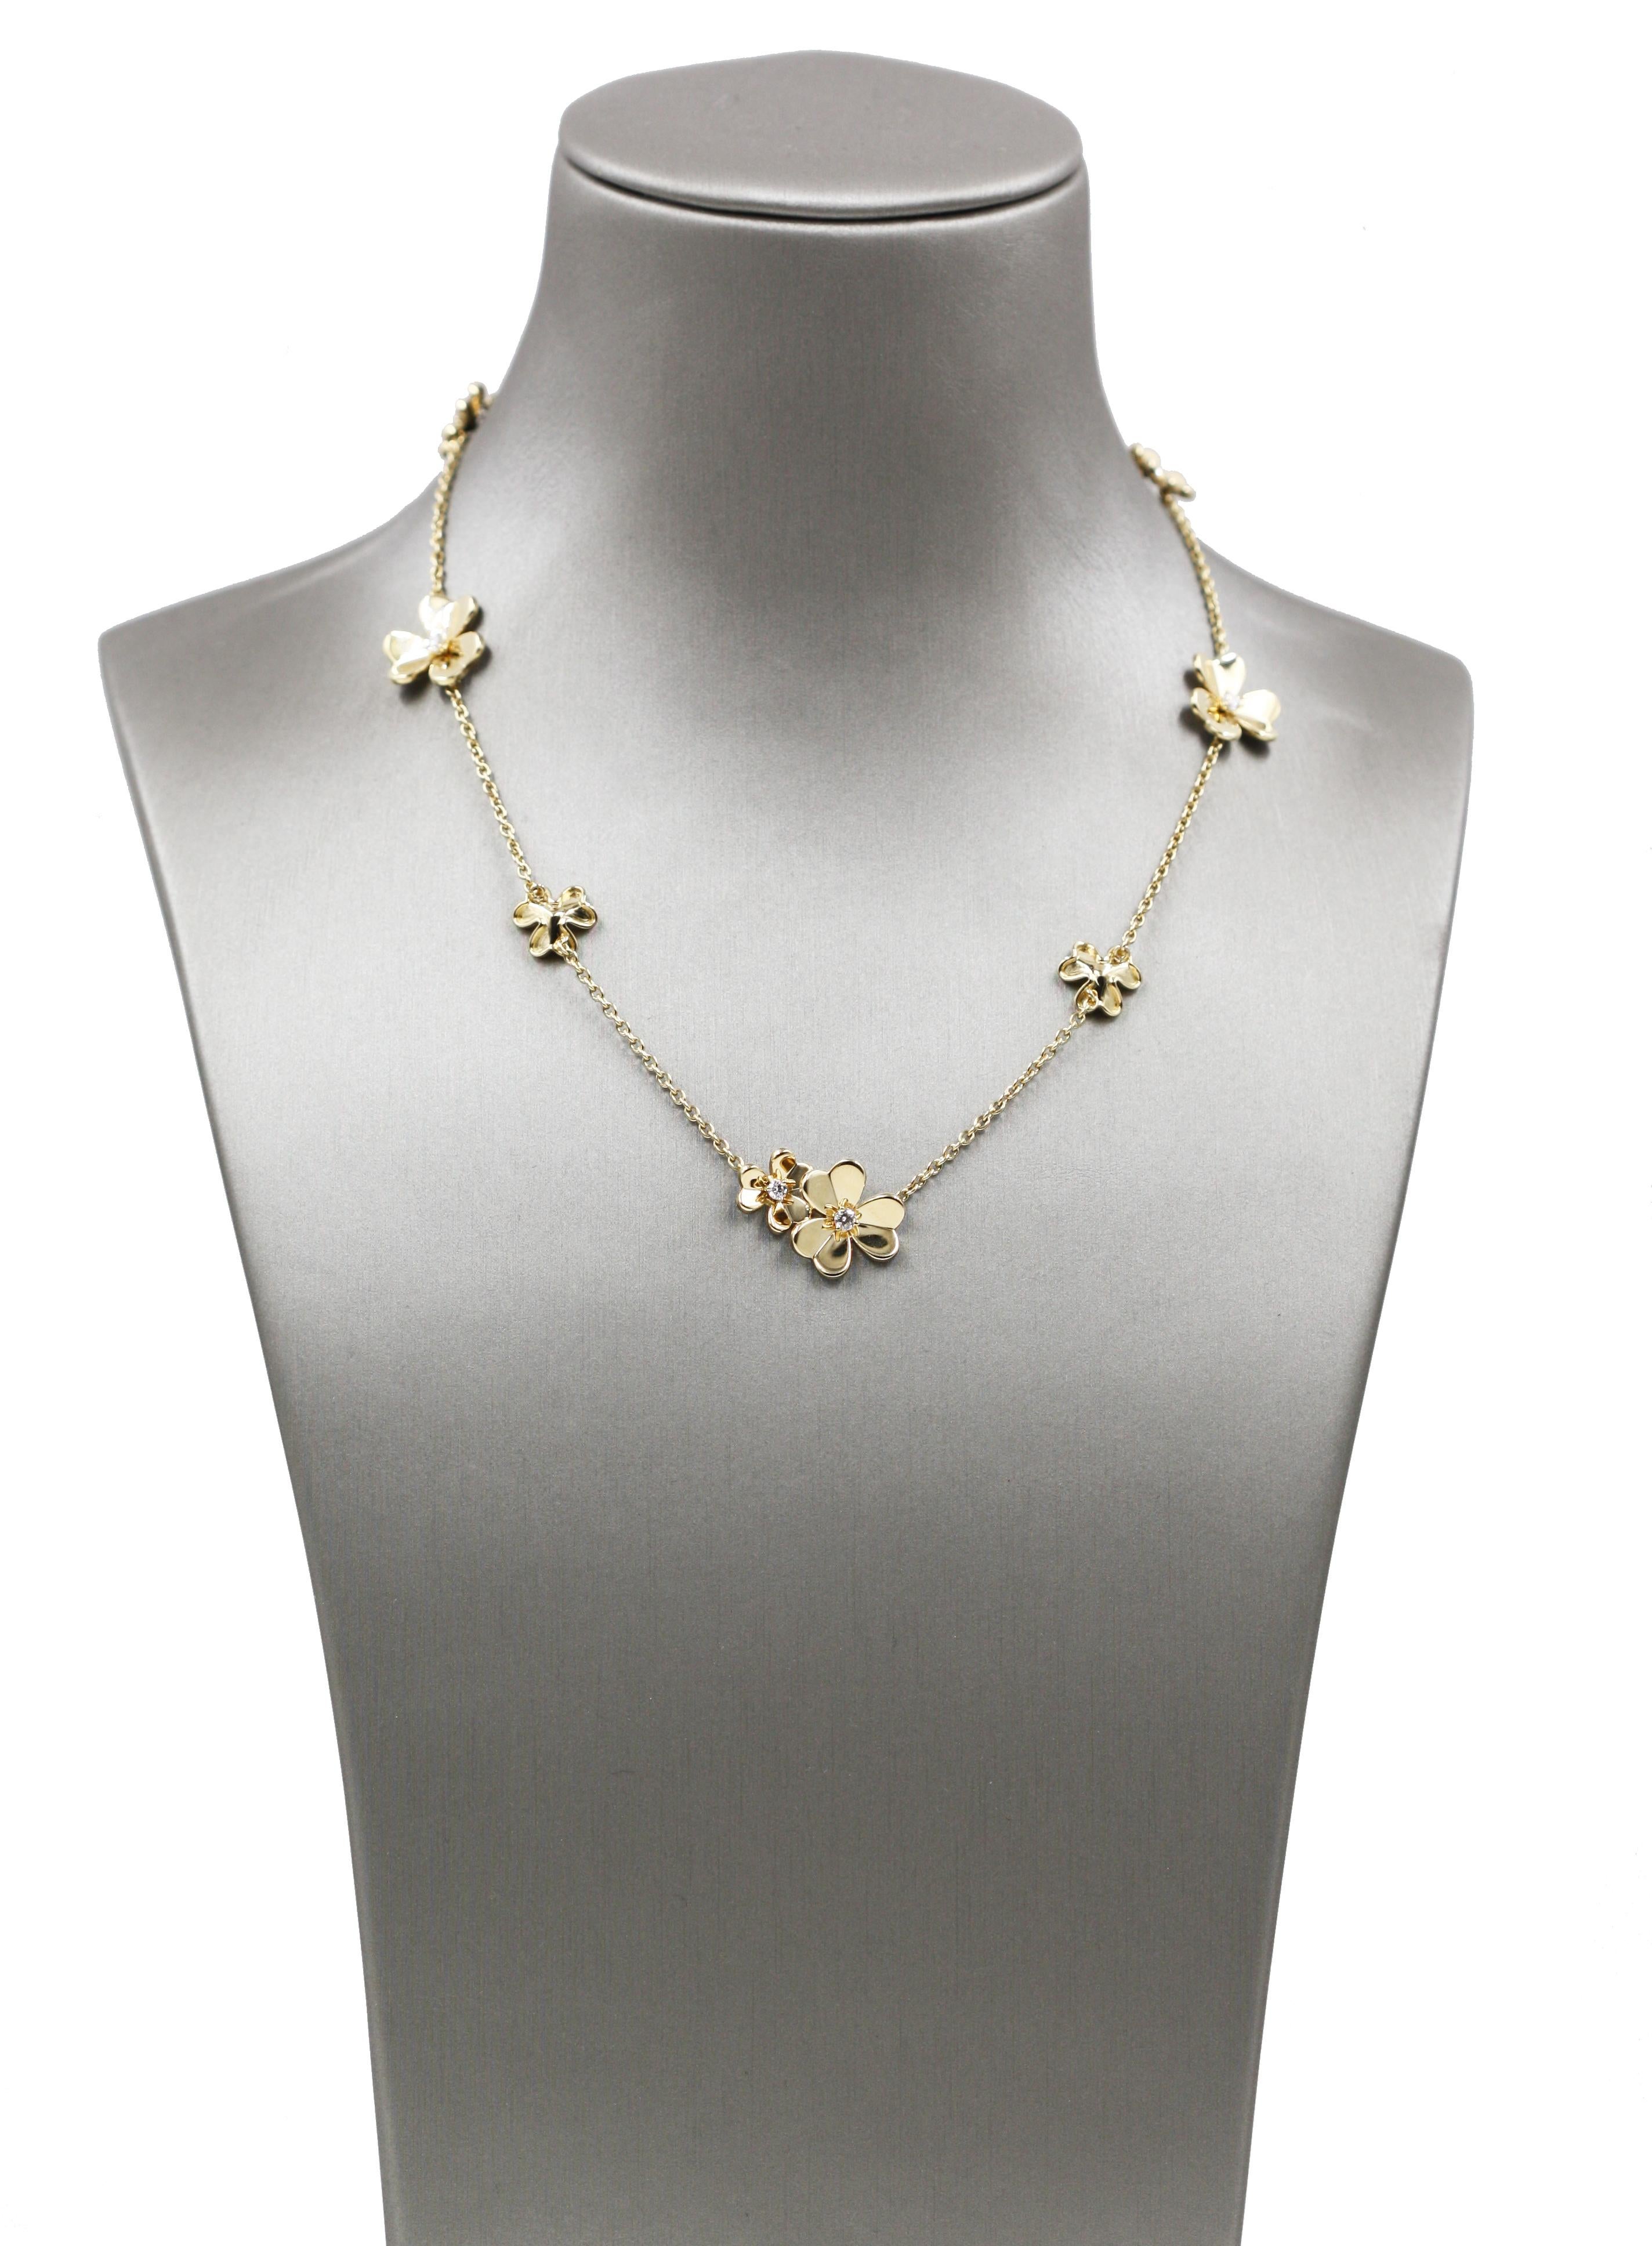 Frivole necklace from Van Cleef & Arpels, 9 flowers, made in 18K yellow gold, round diamonds; diamond quality DEF, IF to VVS.
Reference : VCARD31500

Diamond(s) : 9 stones, 0.61 carats
Hallmark clasp small model yellow gold
Chain length : 16.8